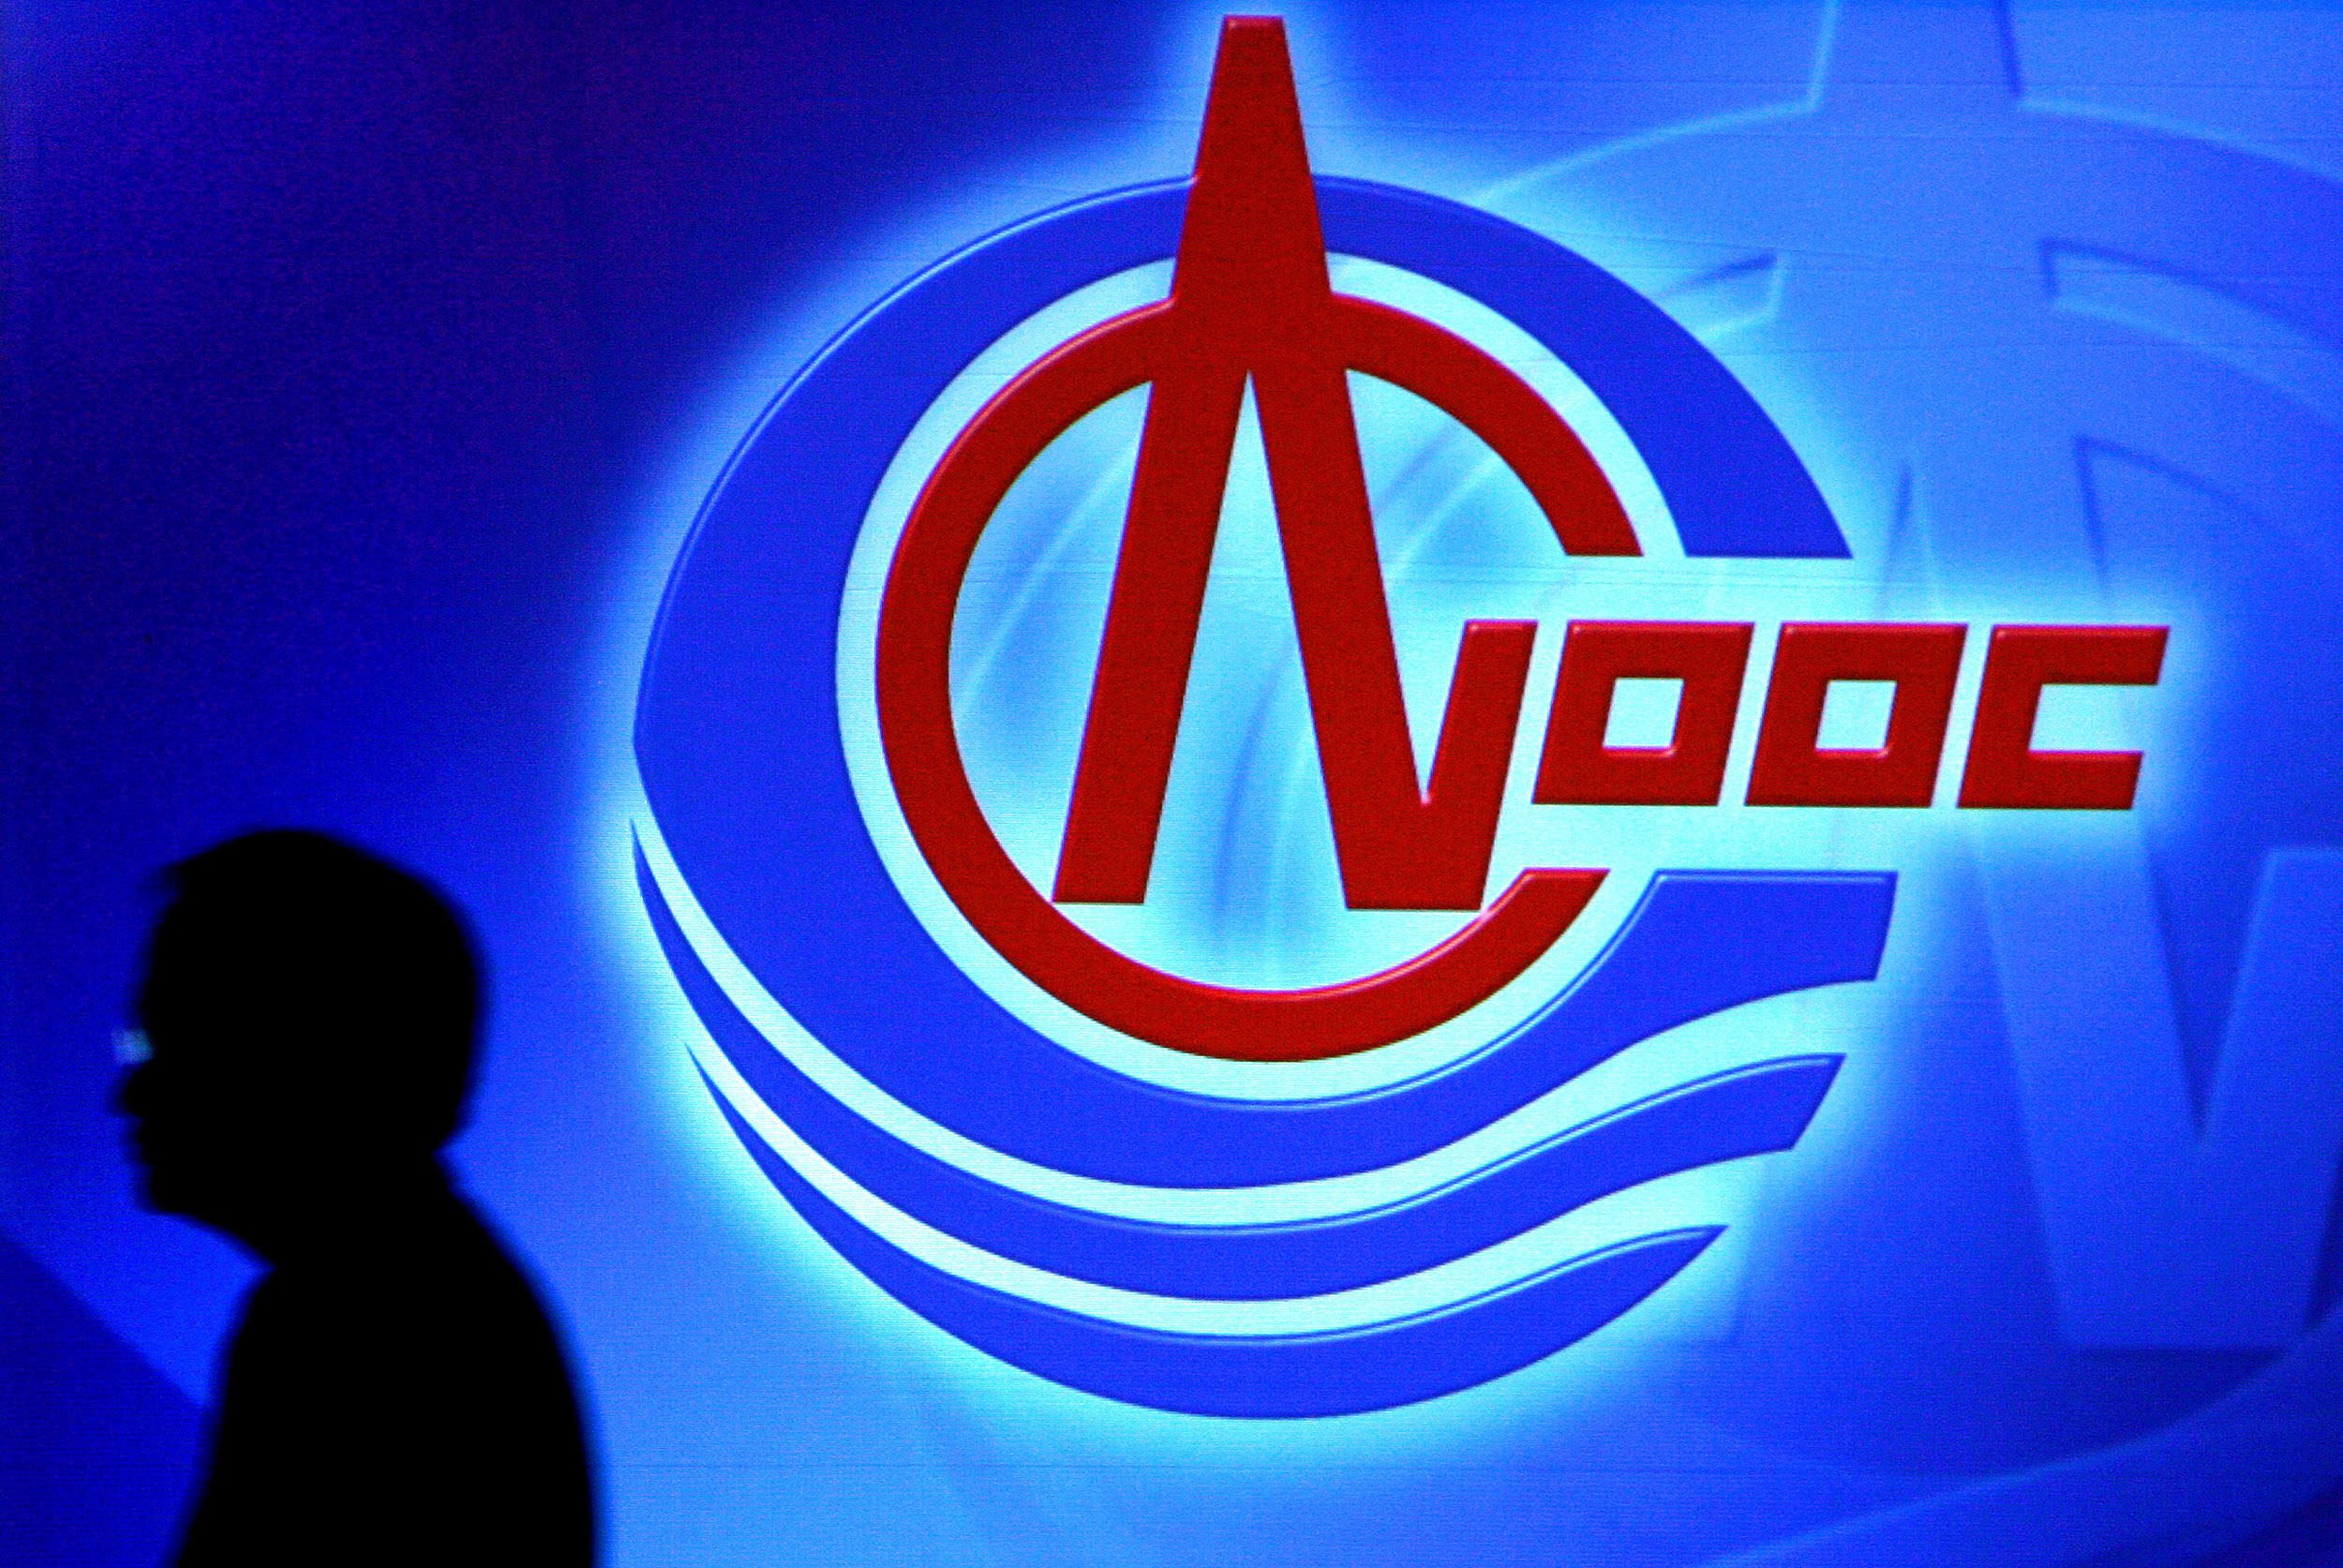 A man walks by a screen showing the logo of China National Offshore Oil Corp (CNOOC) during a video press conference, in Hong Kong. Photo: AFP